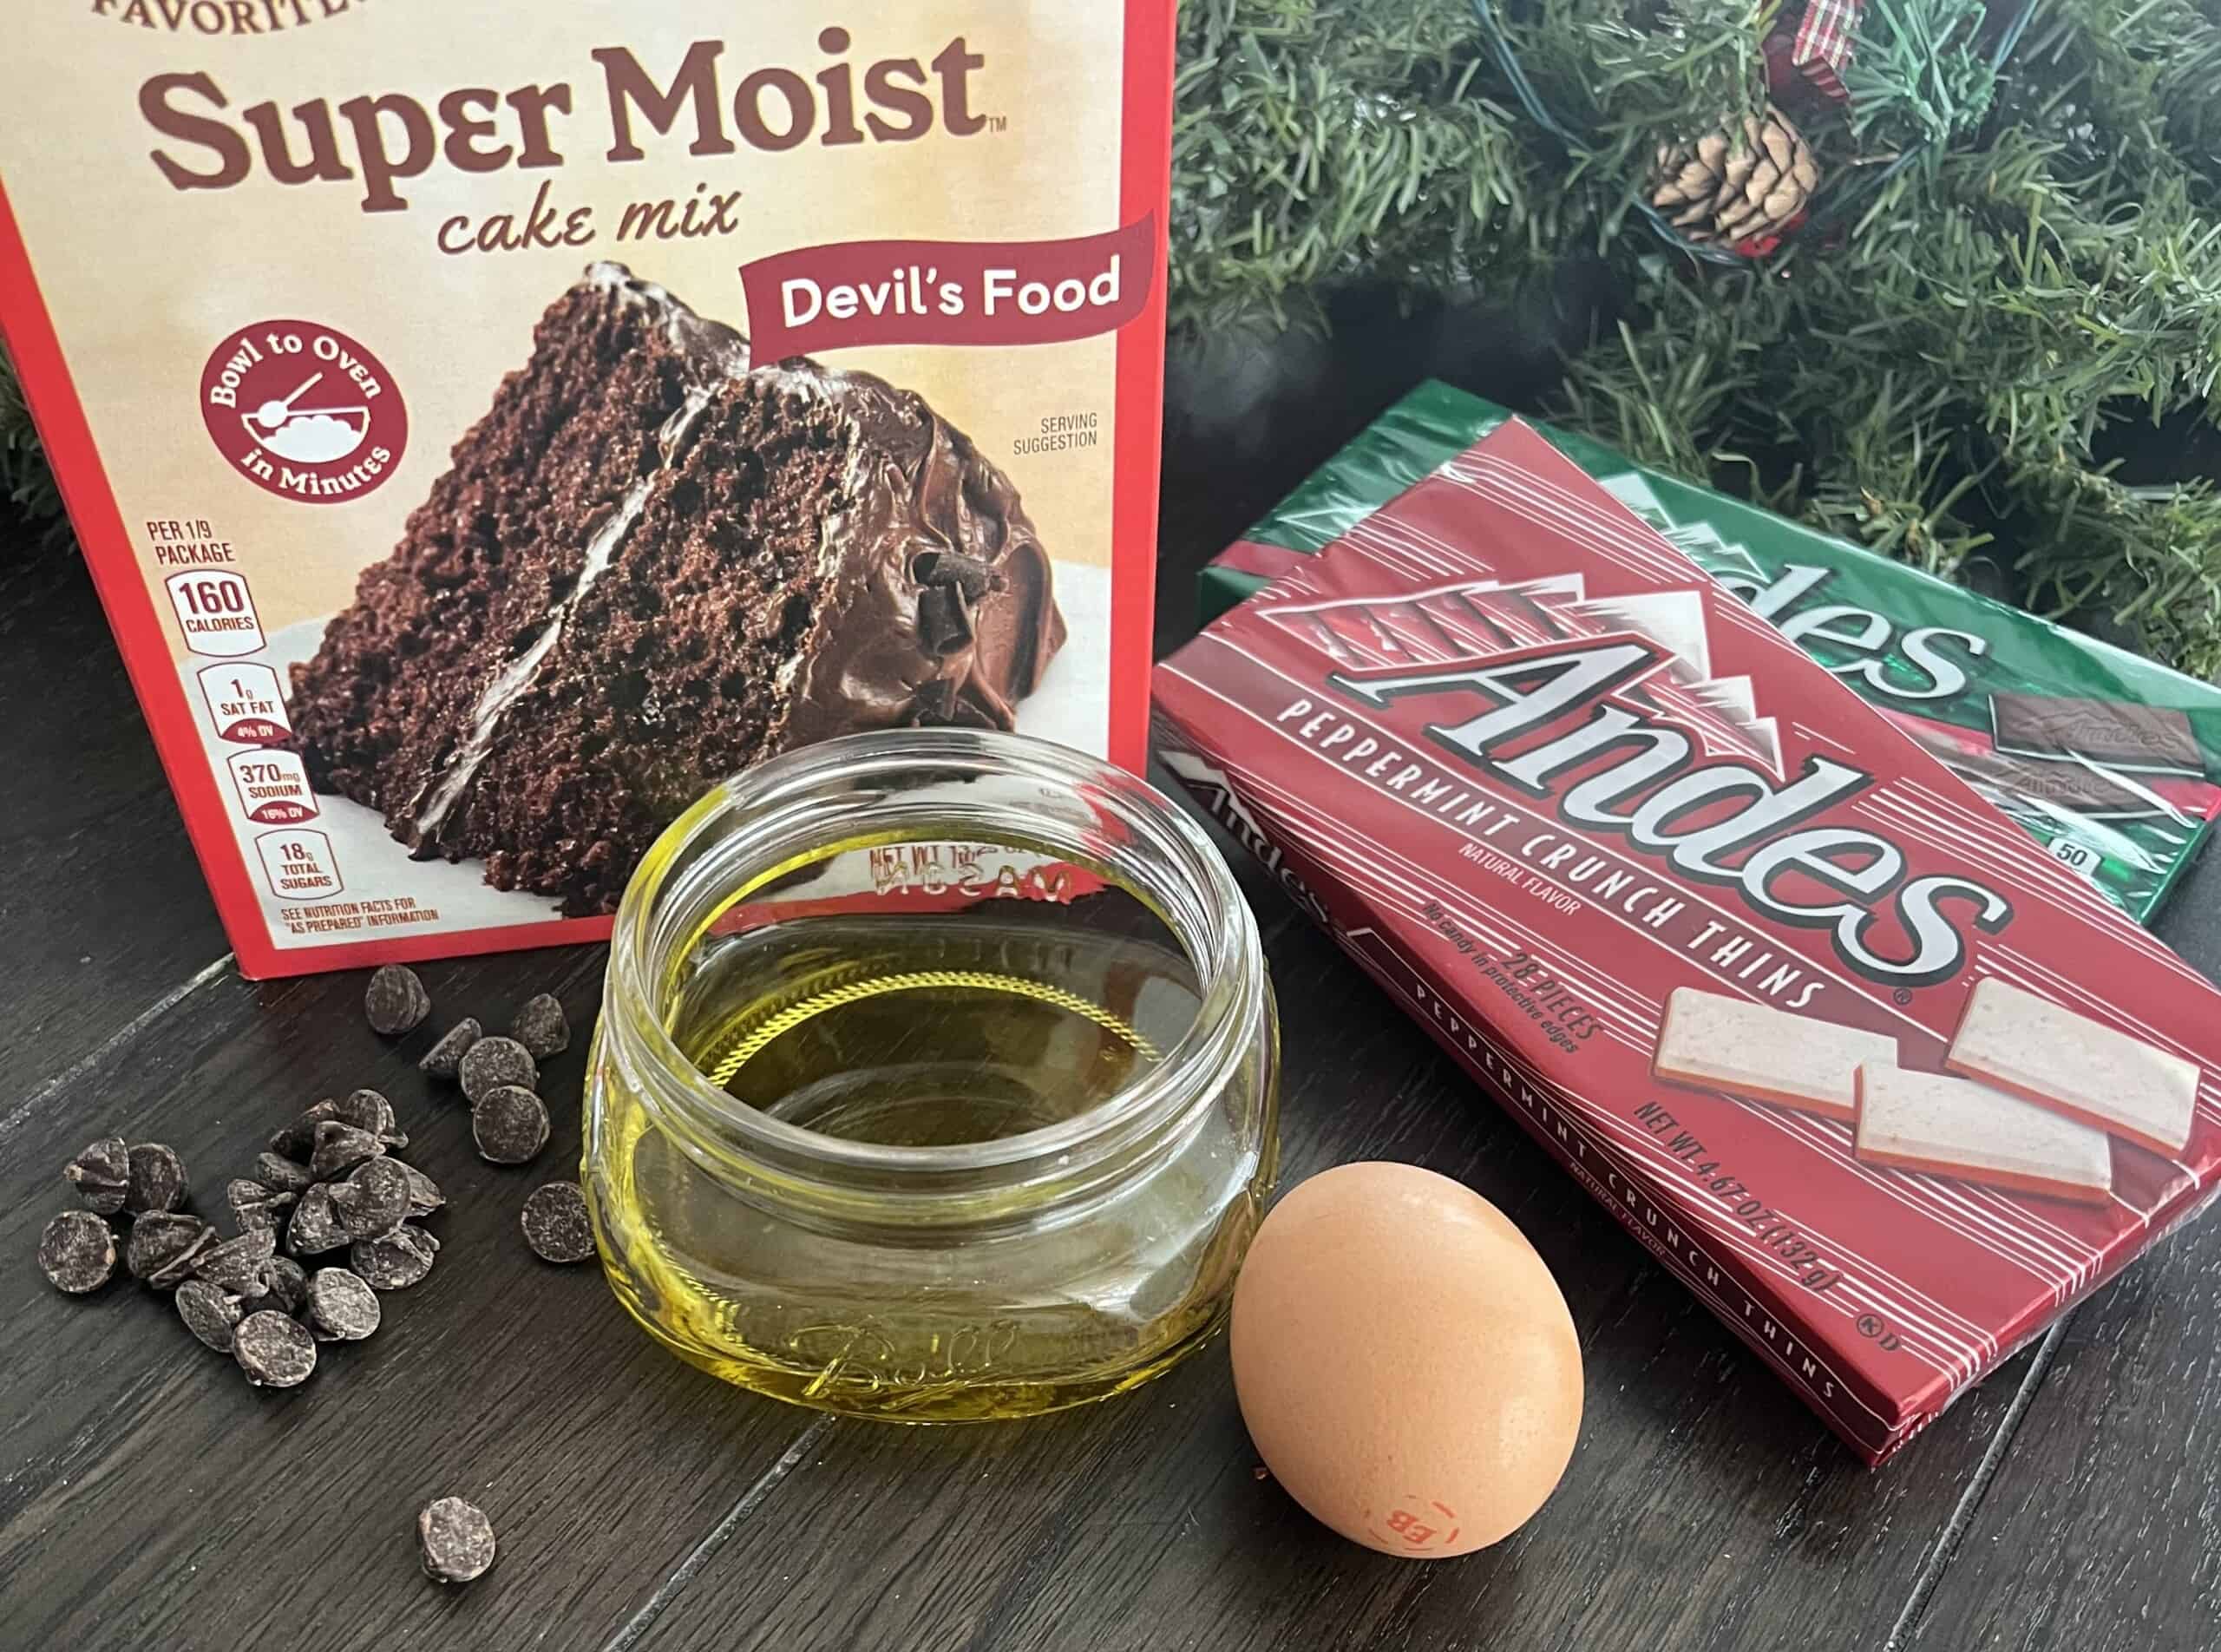 ingredients for mint crinkle cookies include oil, chocolate chips, chocolate cake mix, egg and andes mints